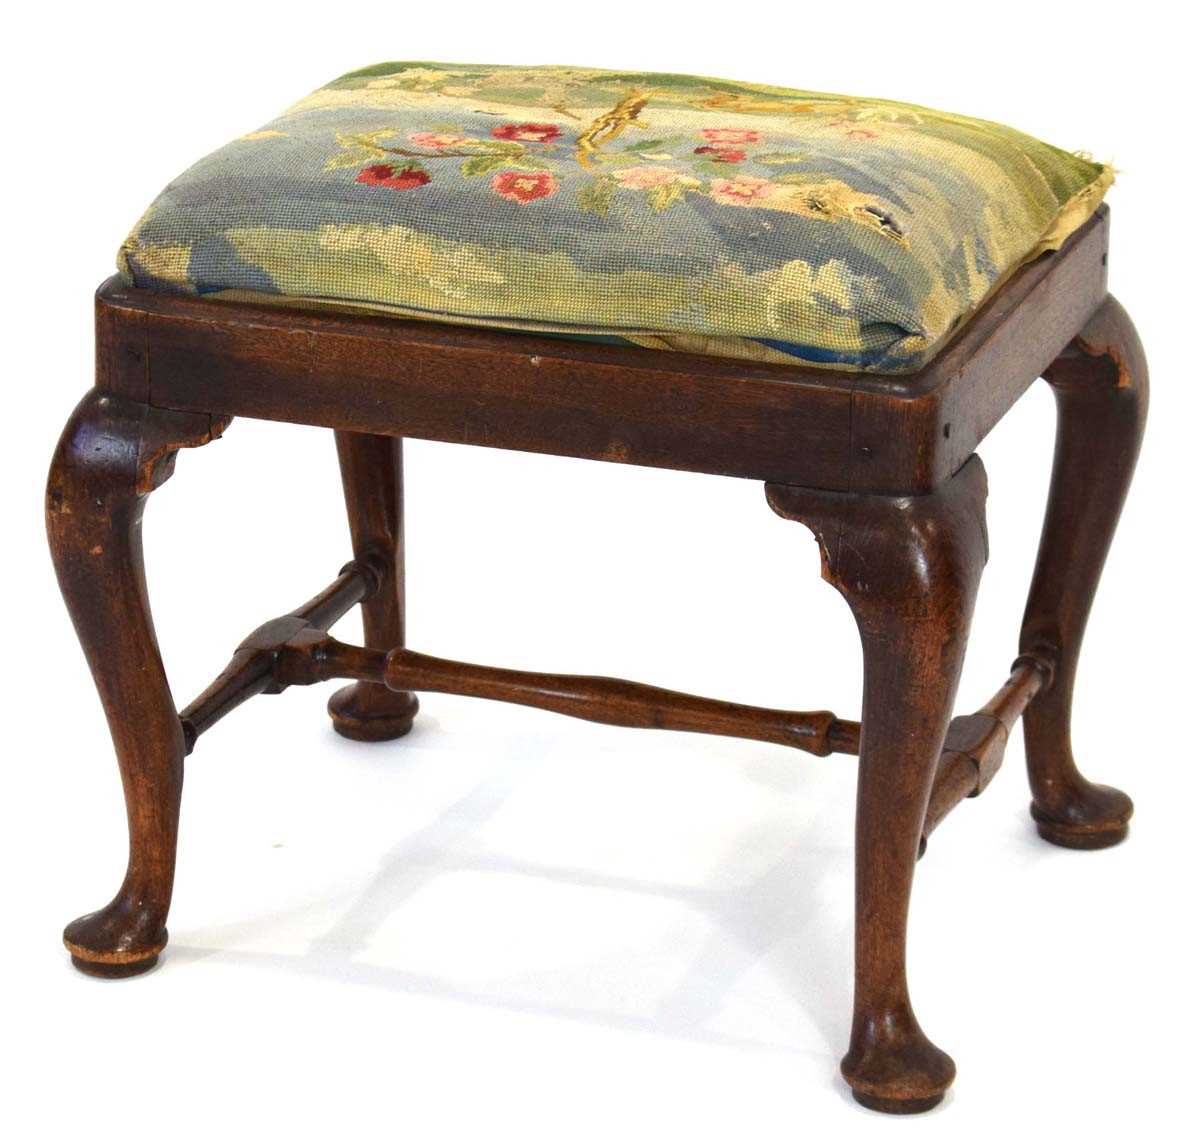 An 18th century and later stool with cabriole legs, an X-stretcher and later embroidered drop-in